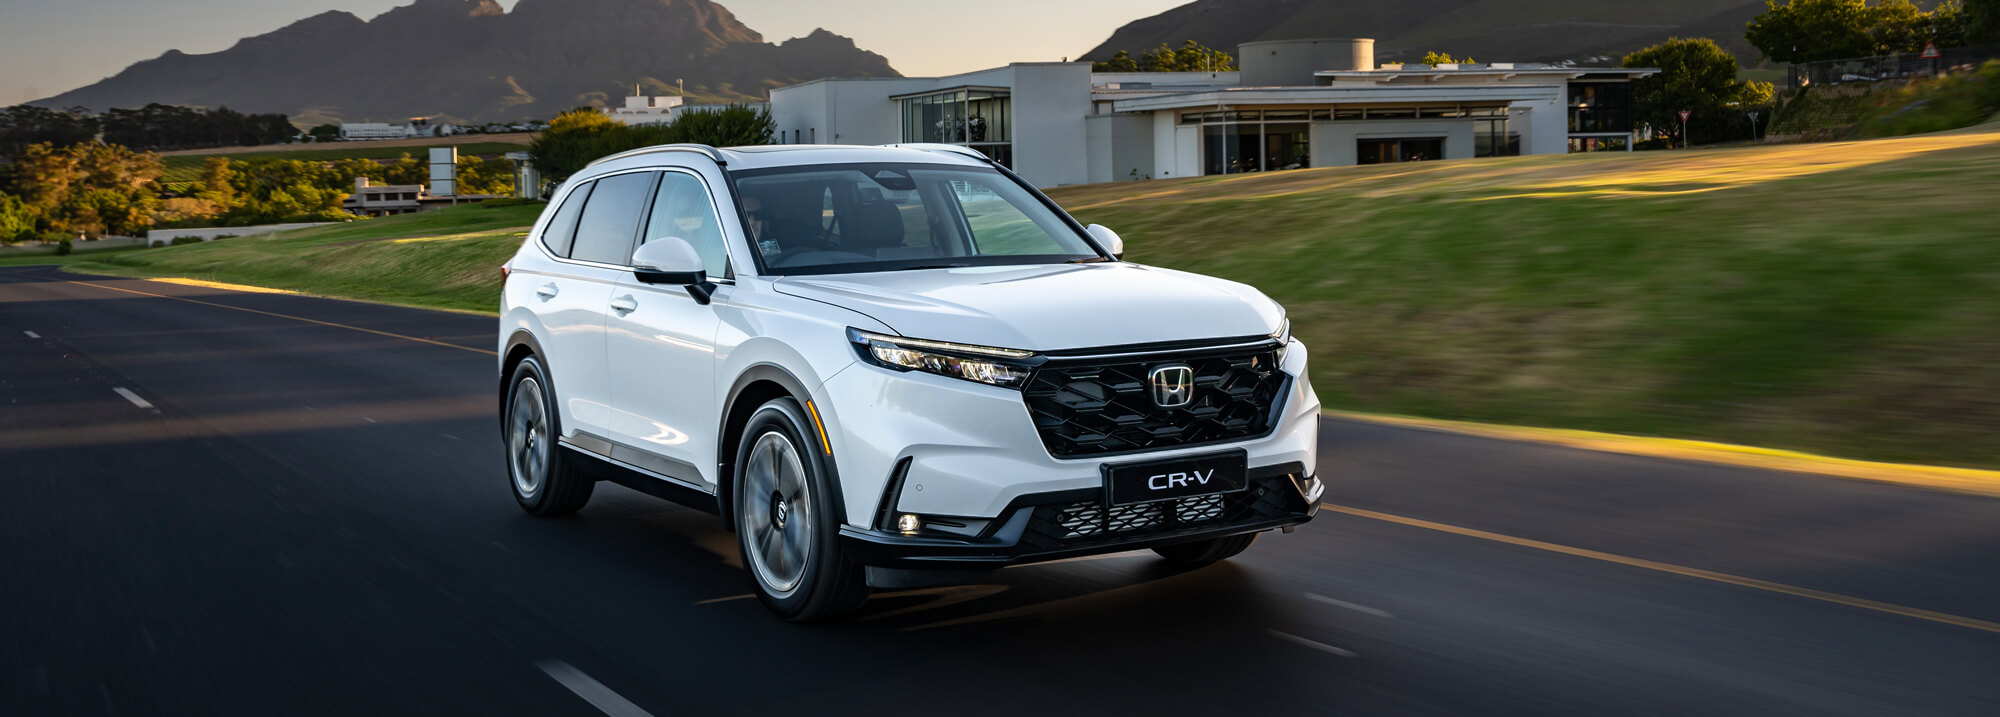 All-new Honda CR-V goes on sale in South Africa video-banner